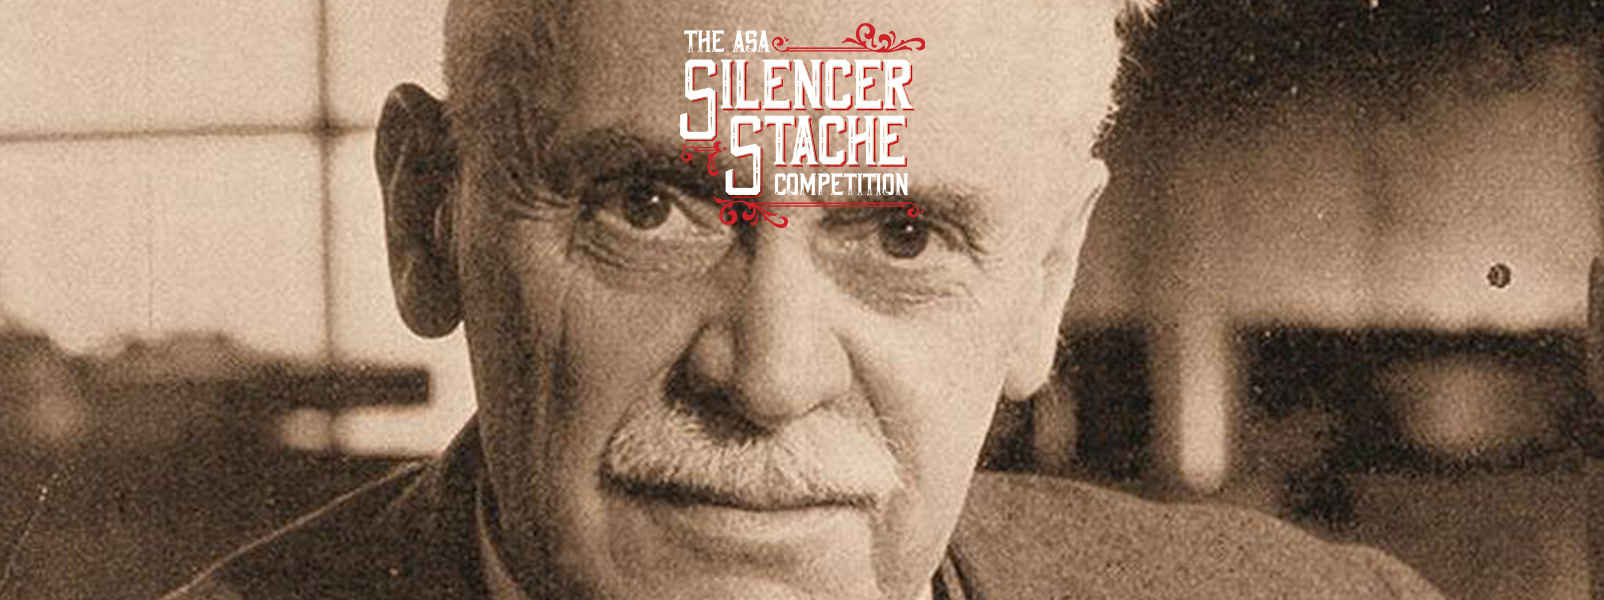 Read more about the article ASA’s Silencer Stache Competition